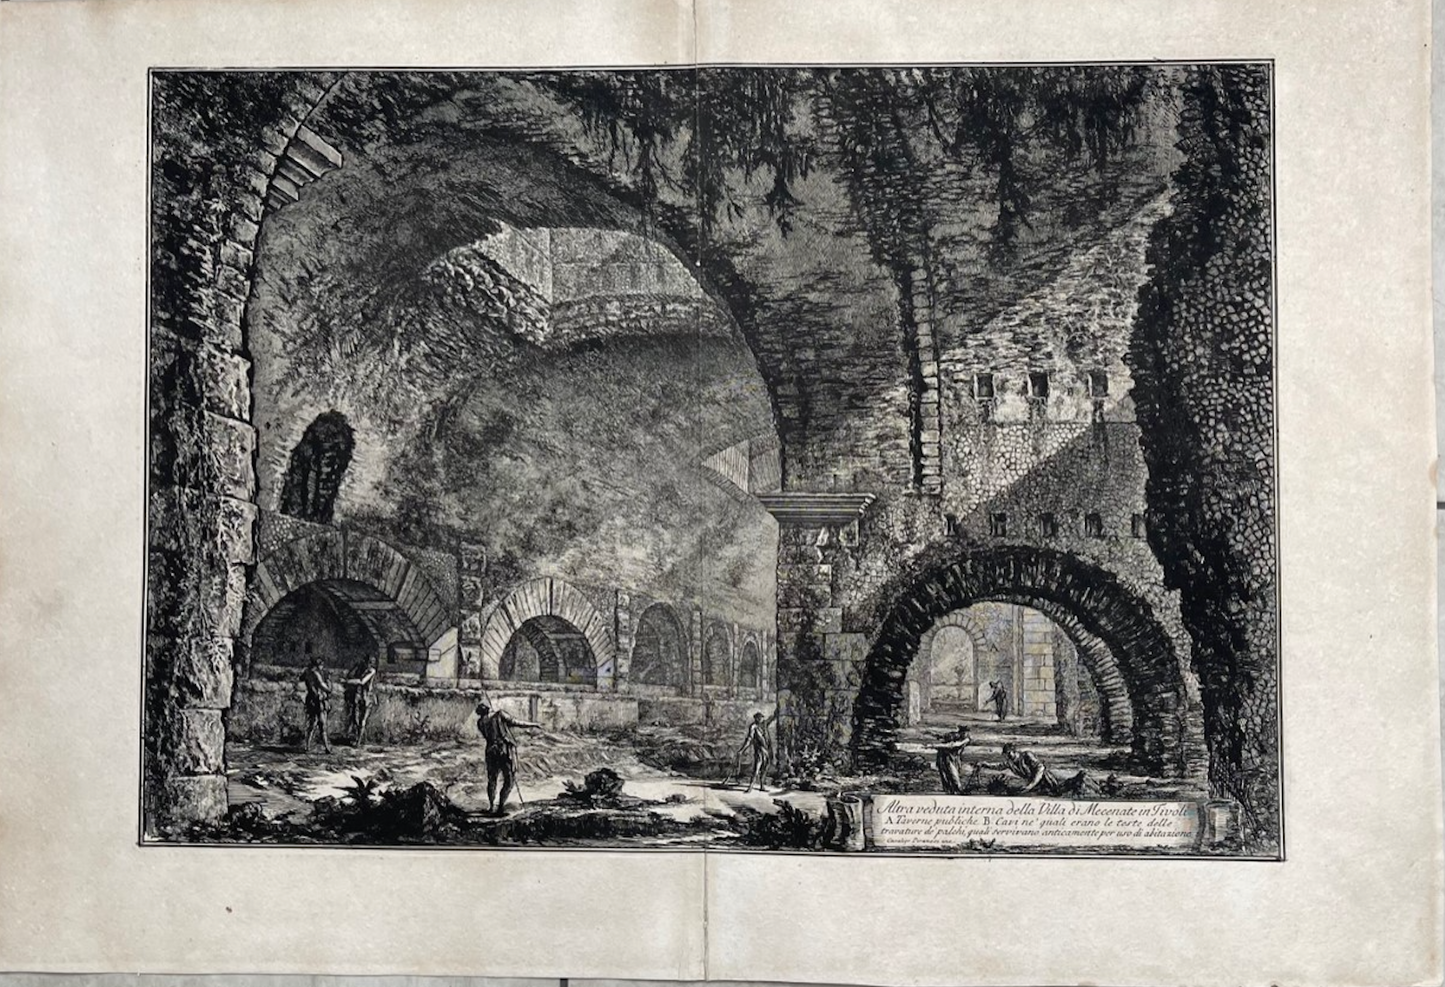 Large 18th century Piranesi etching from his Views of Rome.